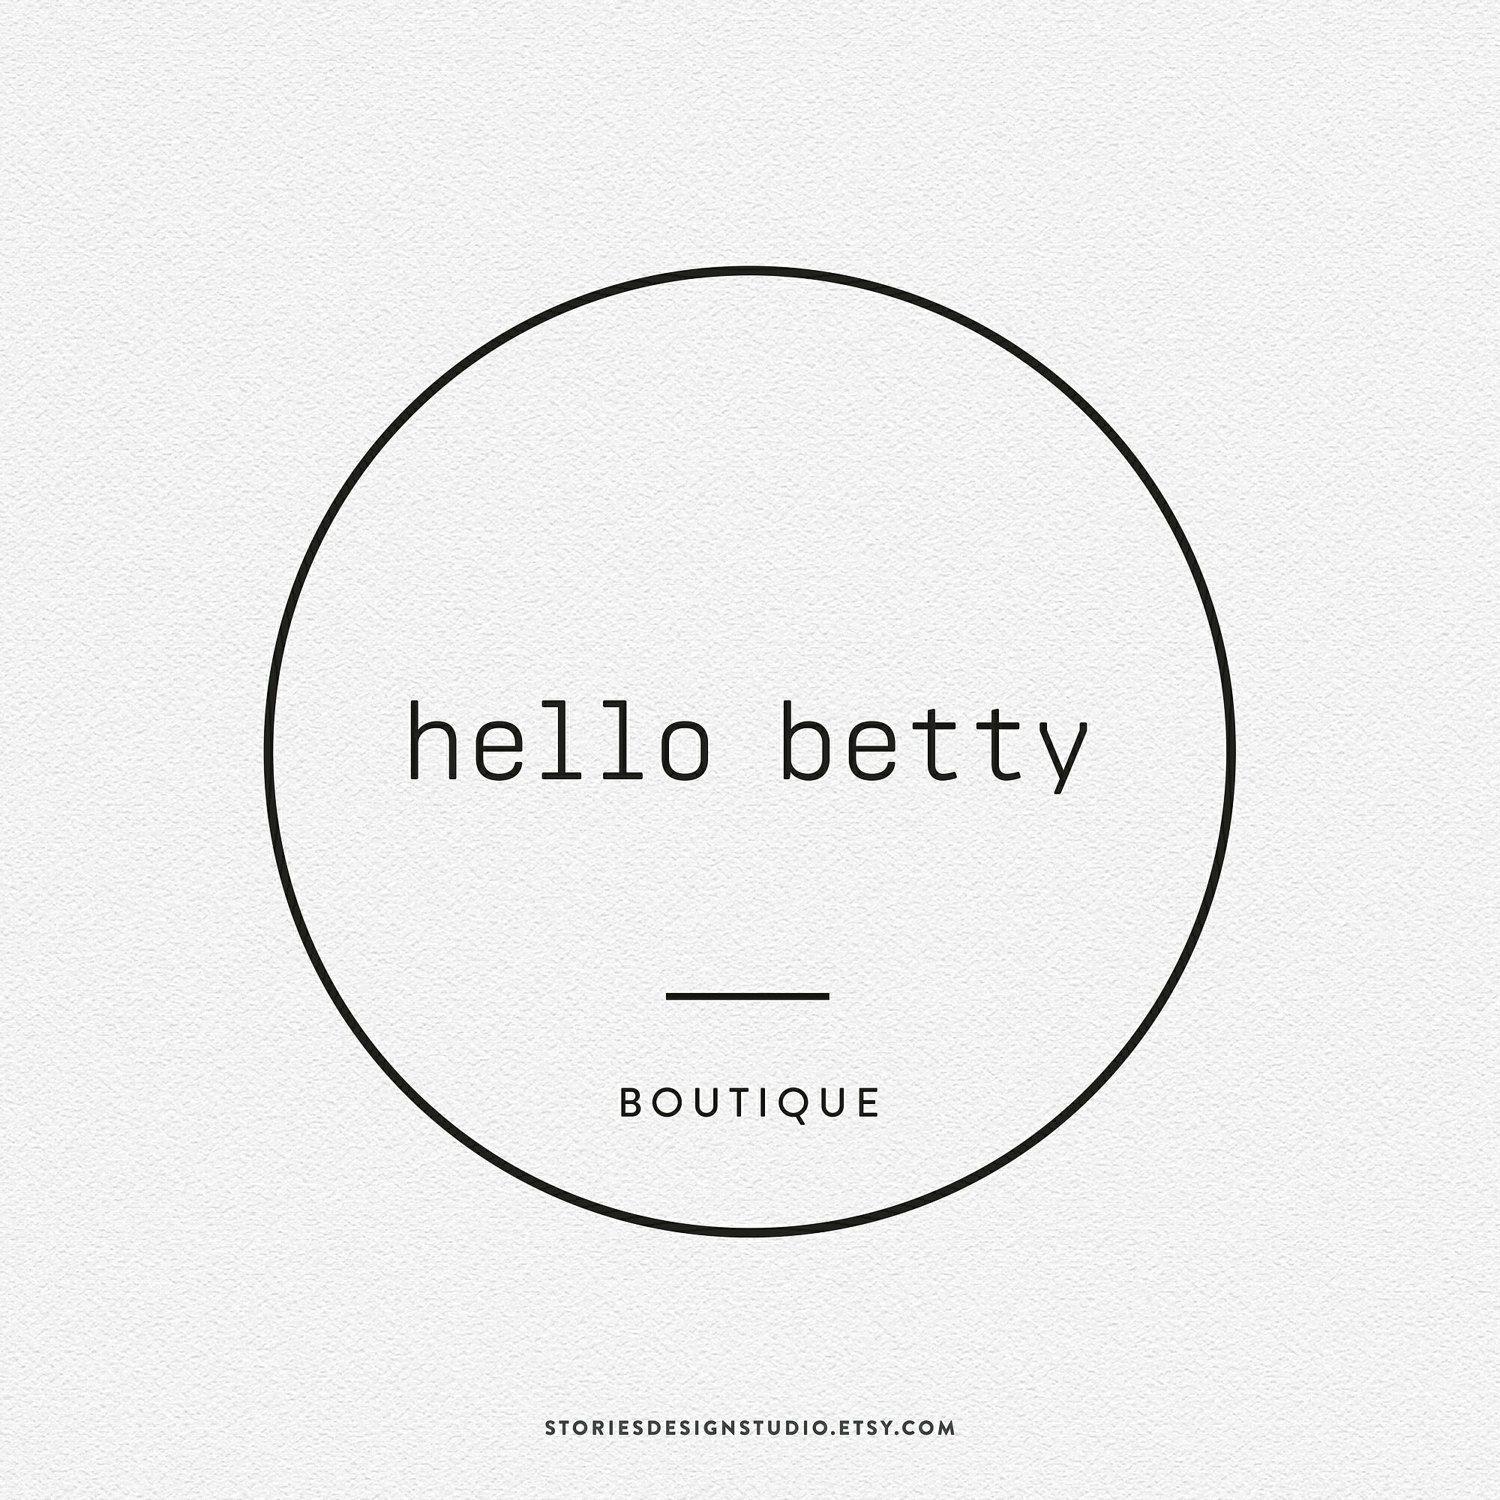 Circle Lady Logo - Black on white logo design and branding ideas and inspiration. A ...